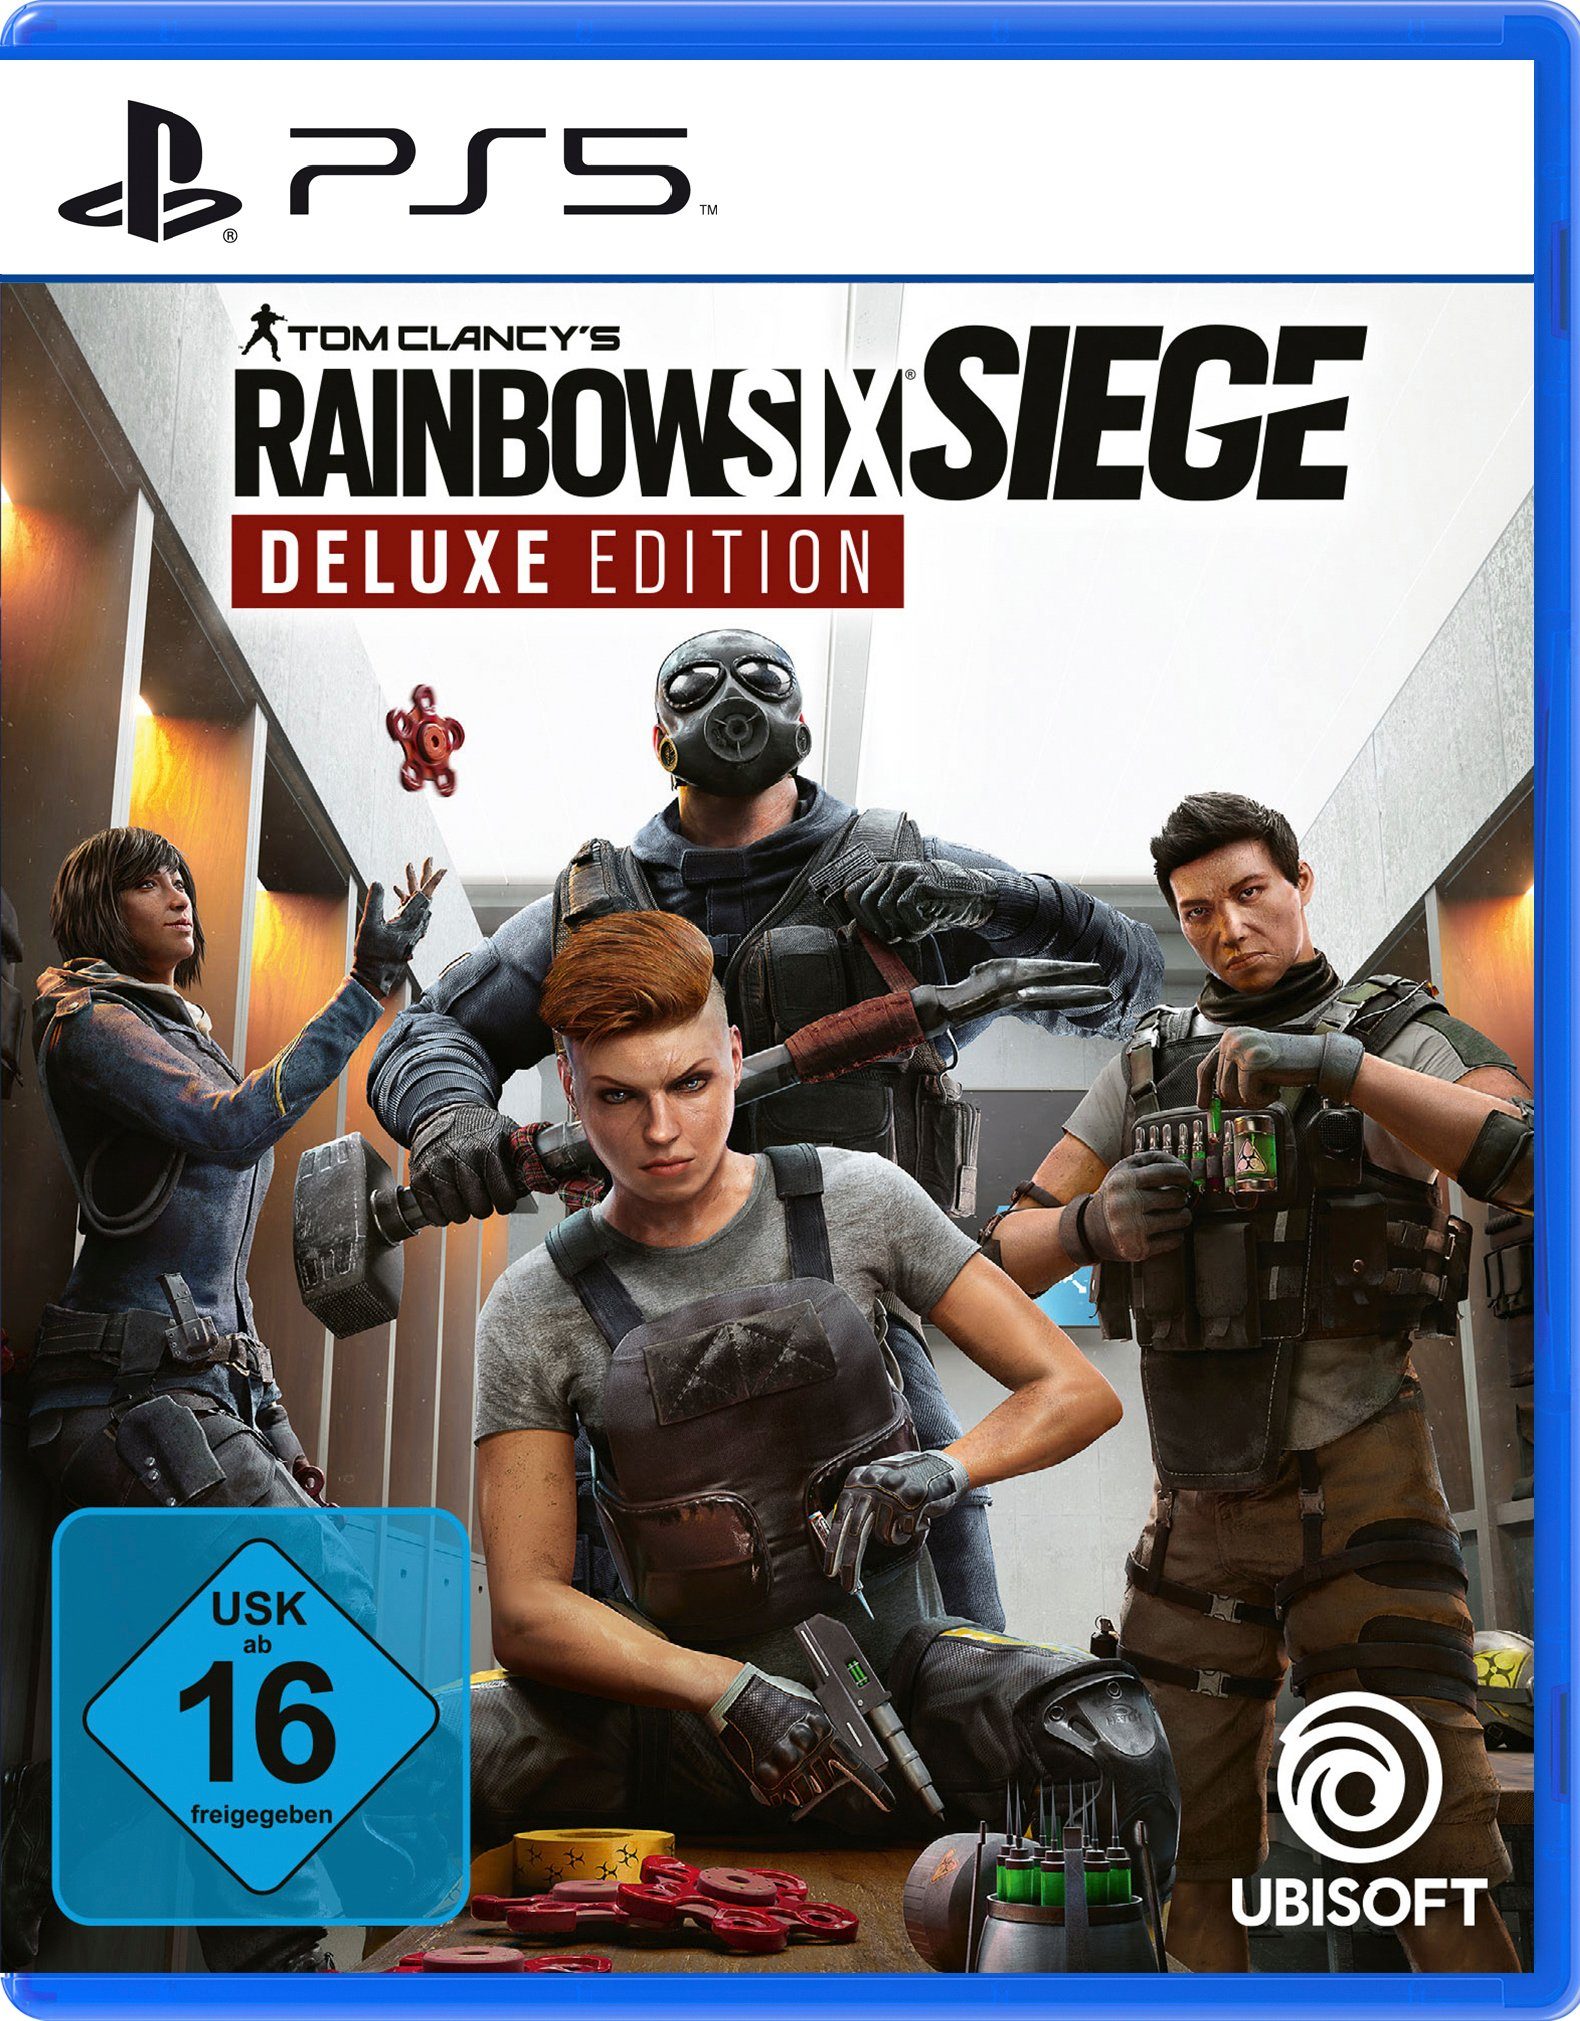 5 Edition Six PlayStation Tom Clancy´s Siege Rainbow Deluxe UBISOFT